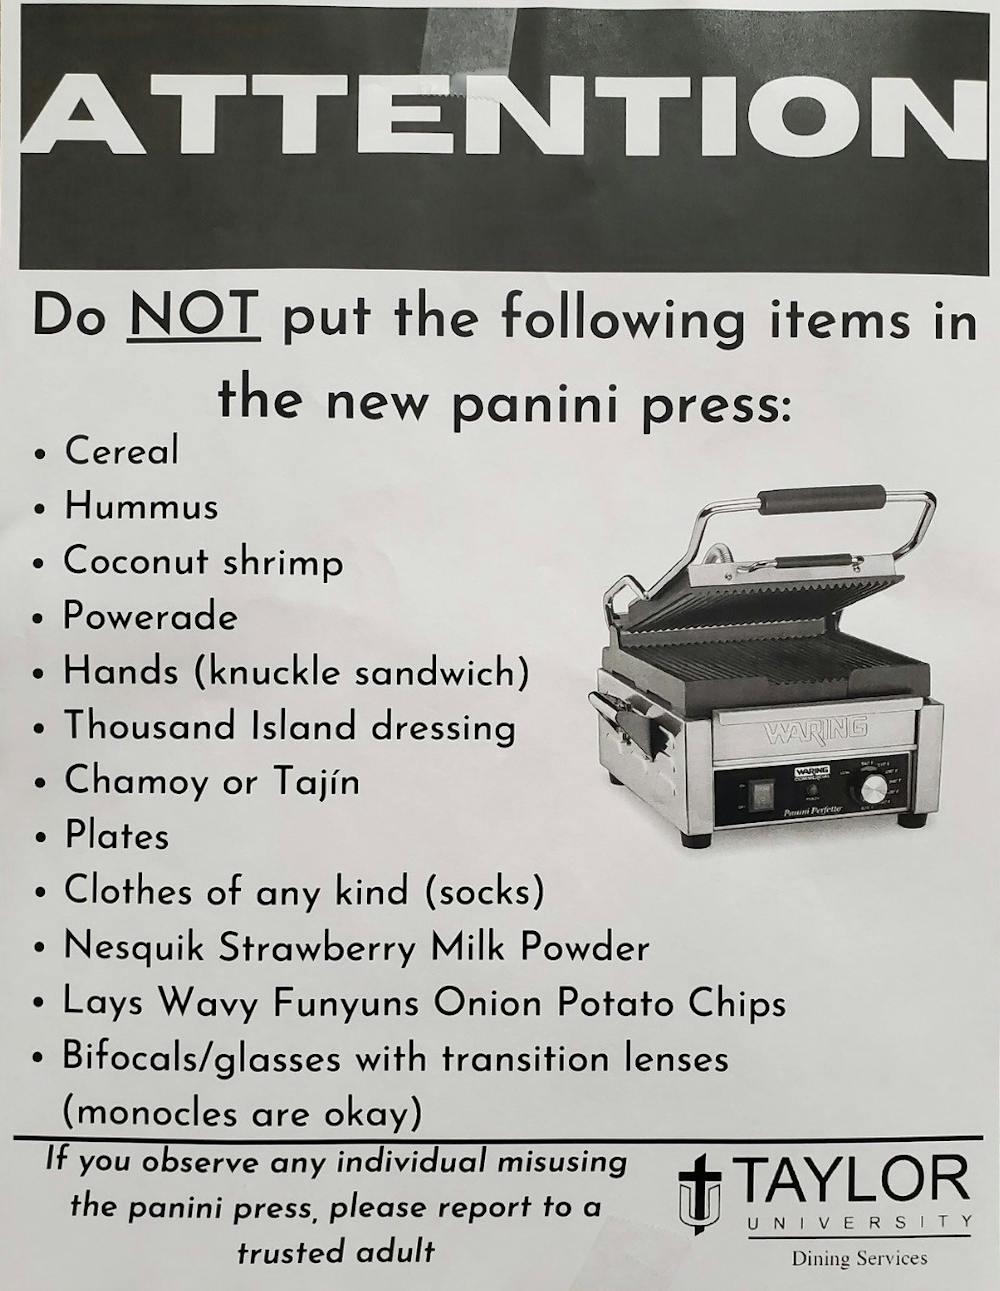 People ponder meaning behind panini press posters 